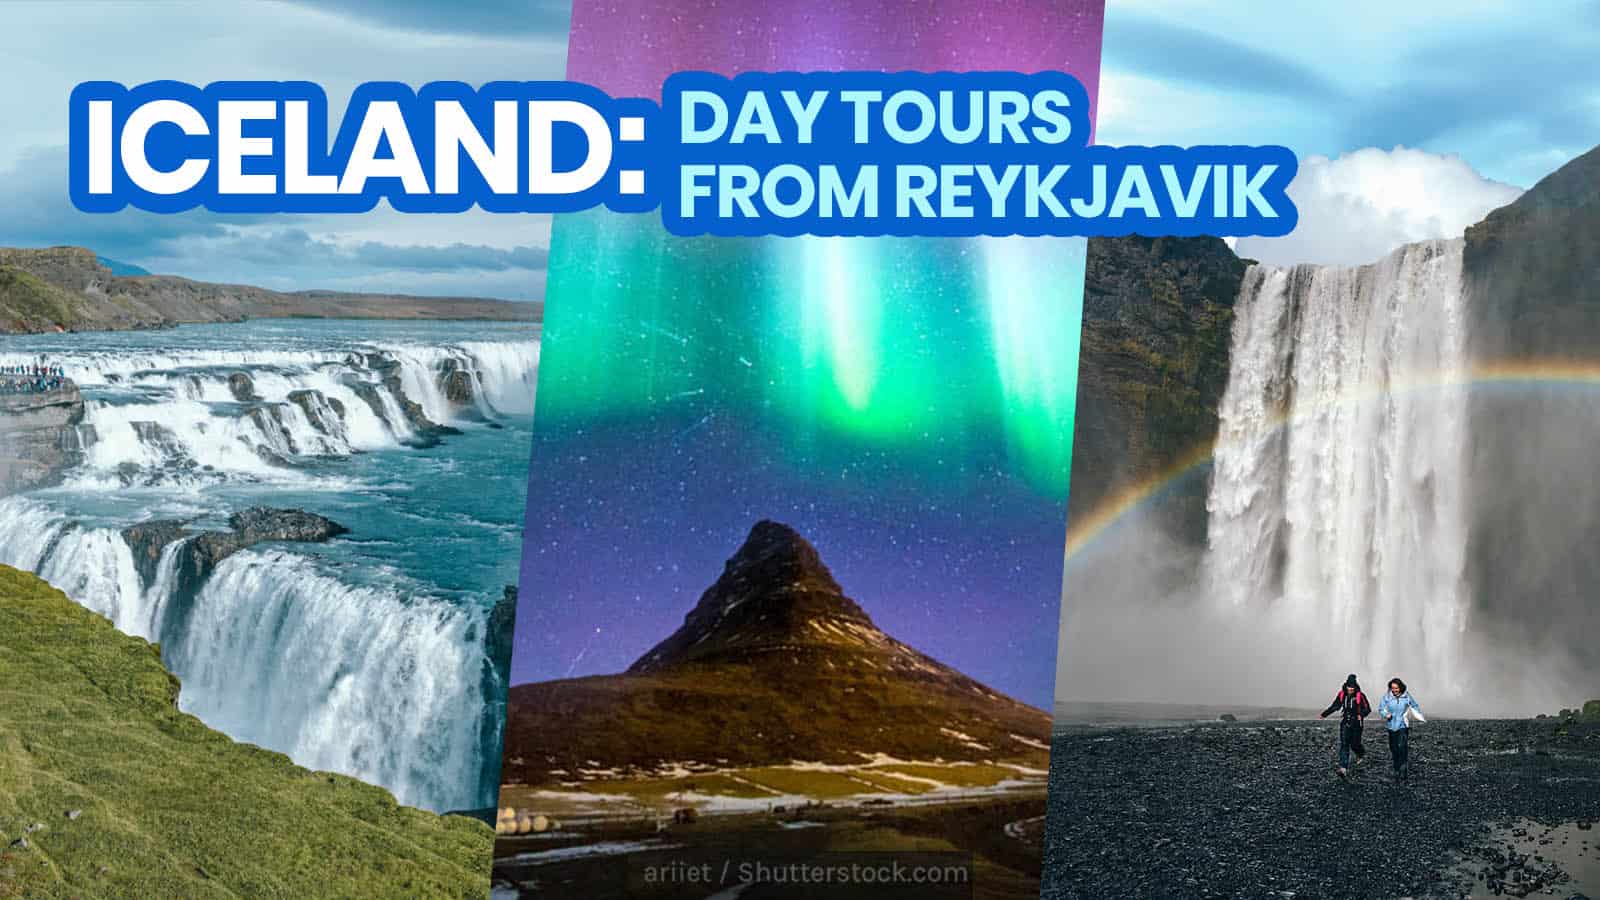 15 DAY TOURS FROM REYKJAVIK: Top Things to Do in Iceland